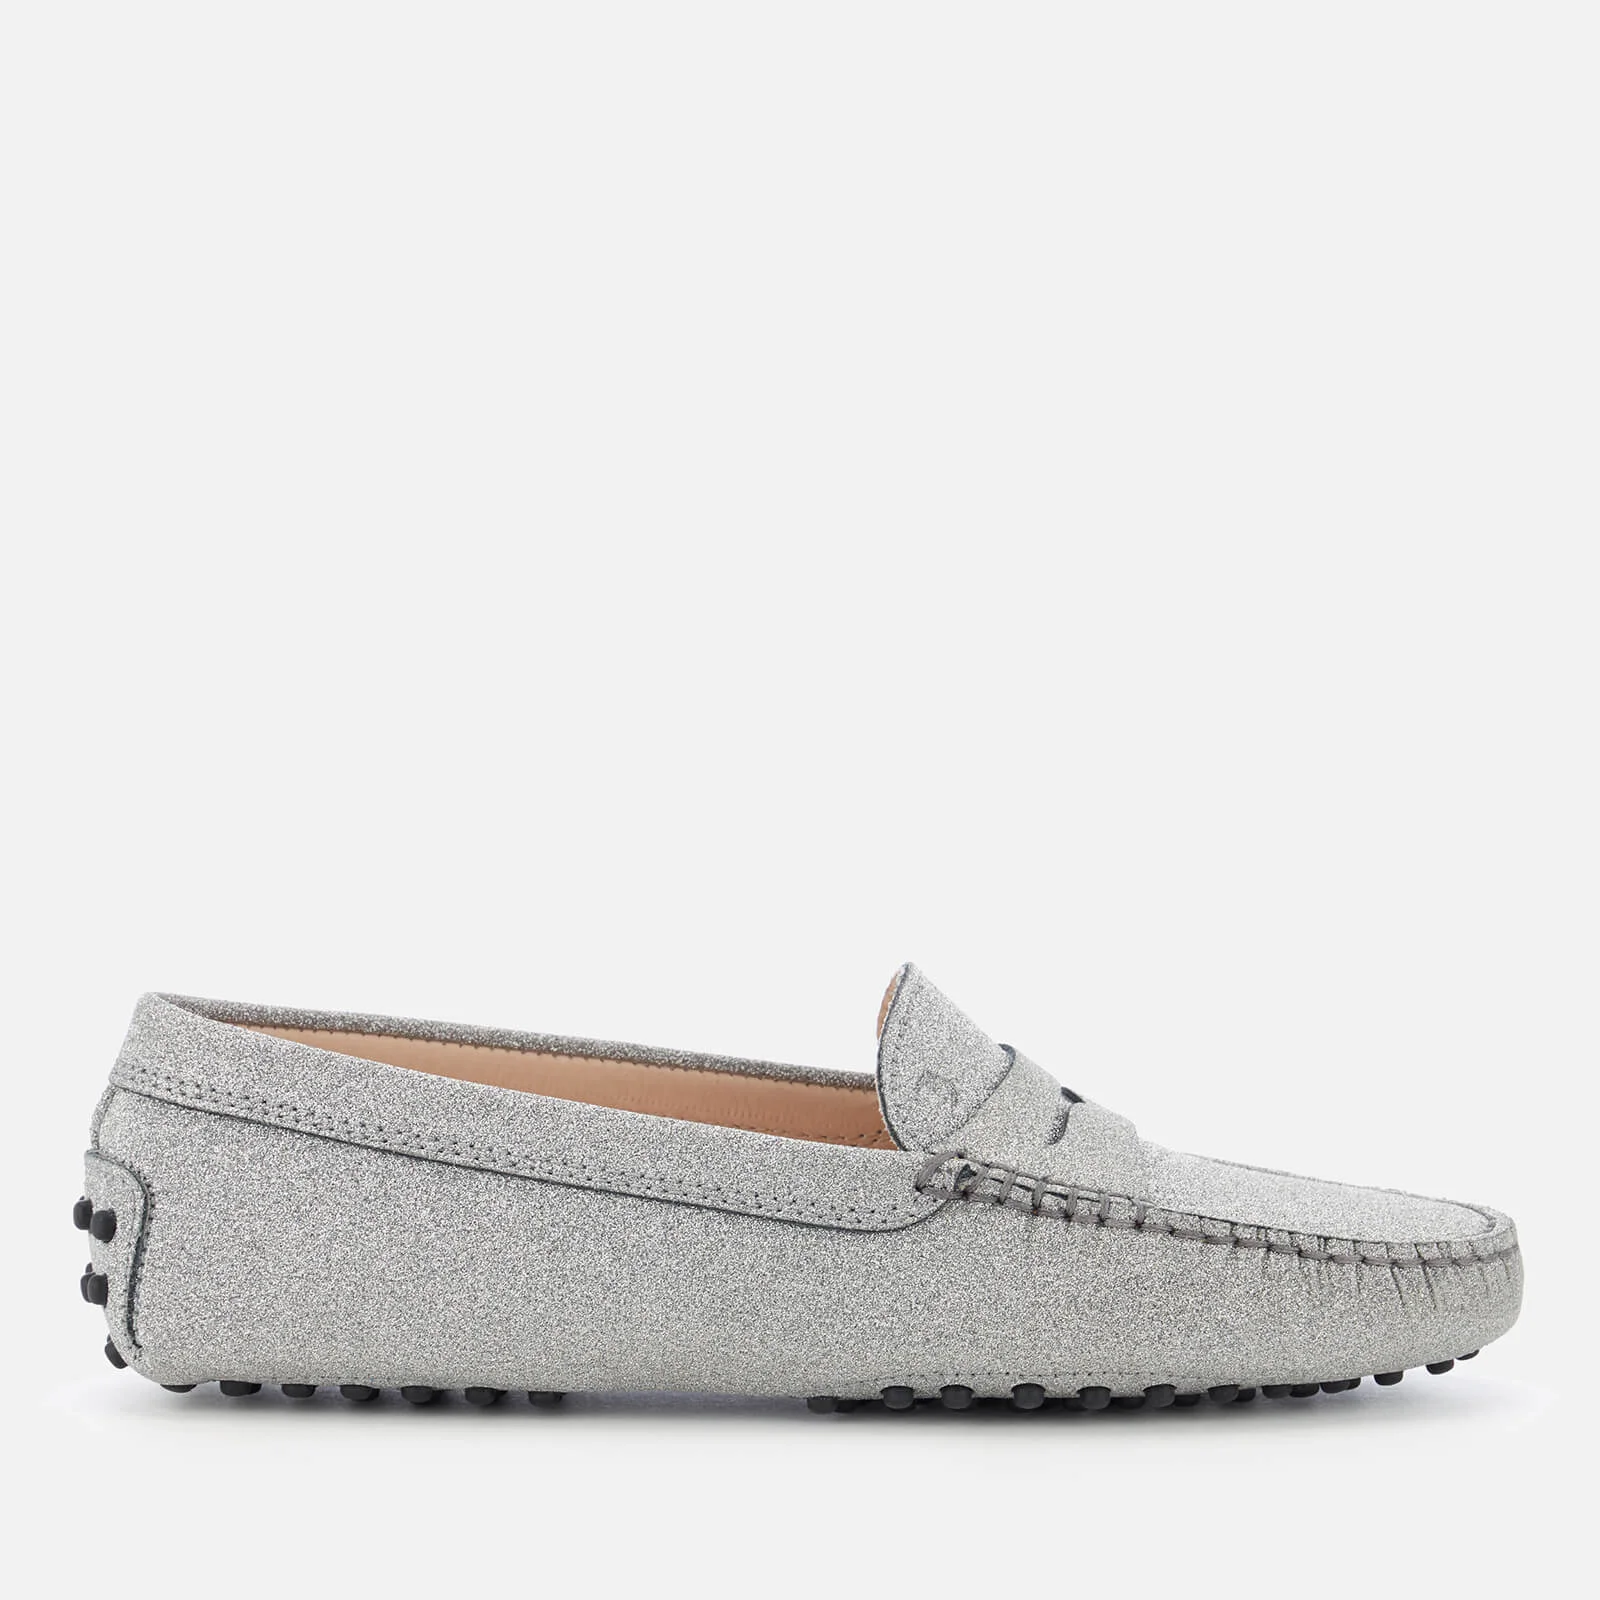 Tod's Women's Glitter Driving Shoes - Grey Image 1